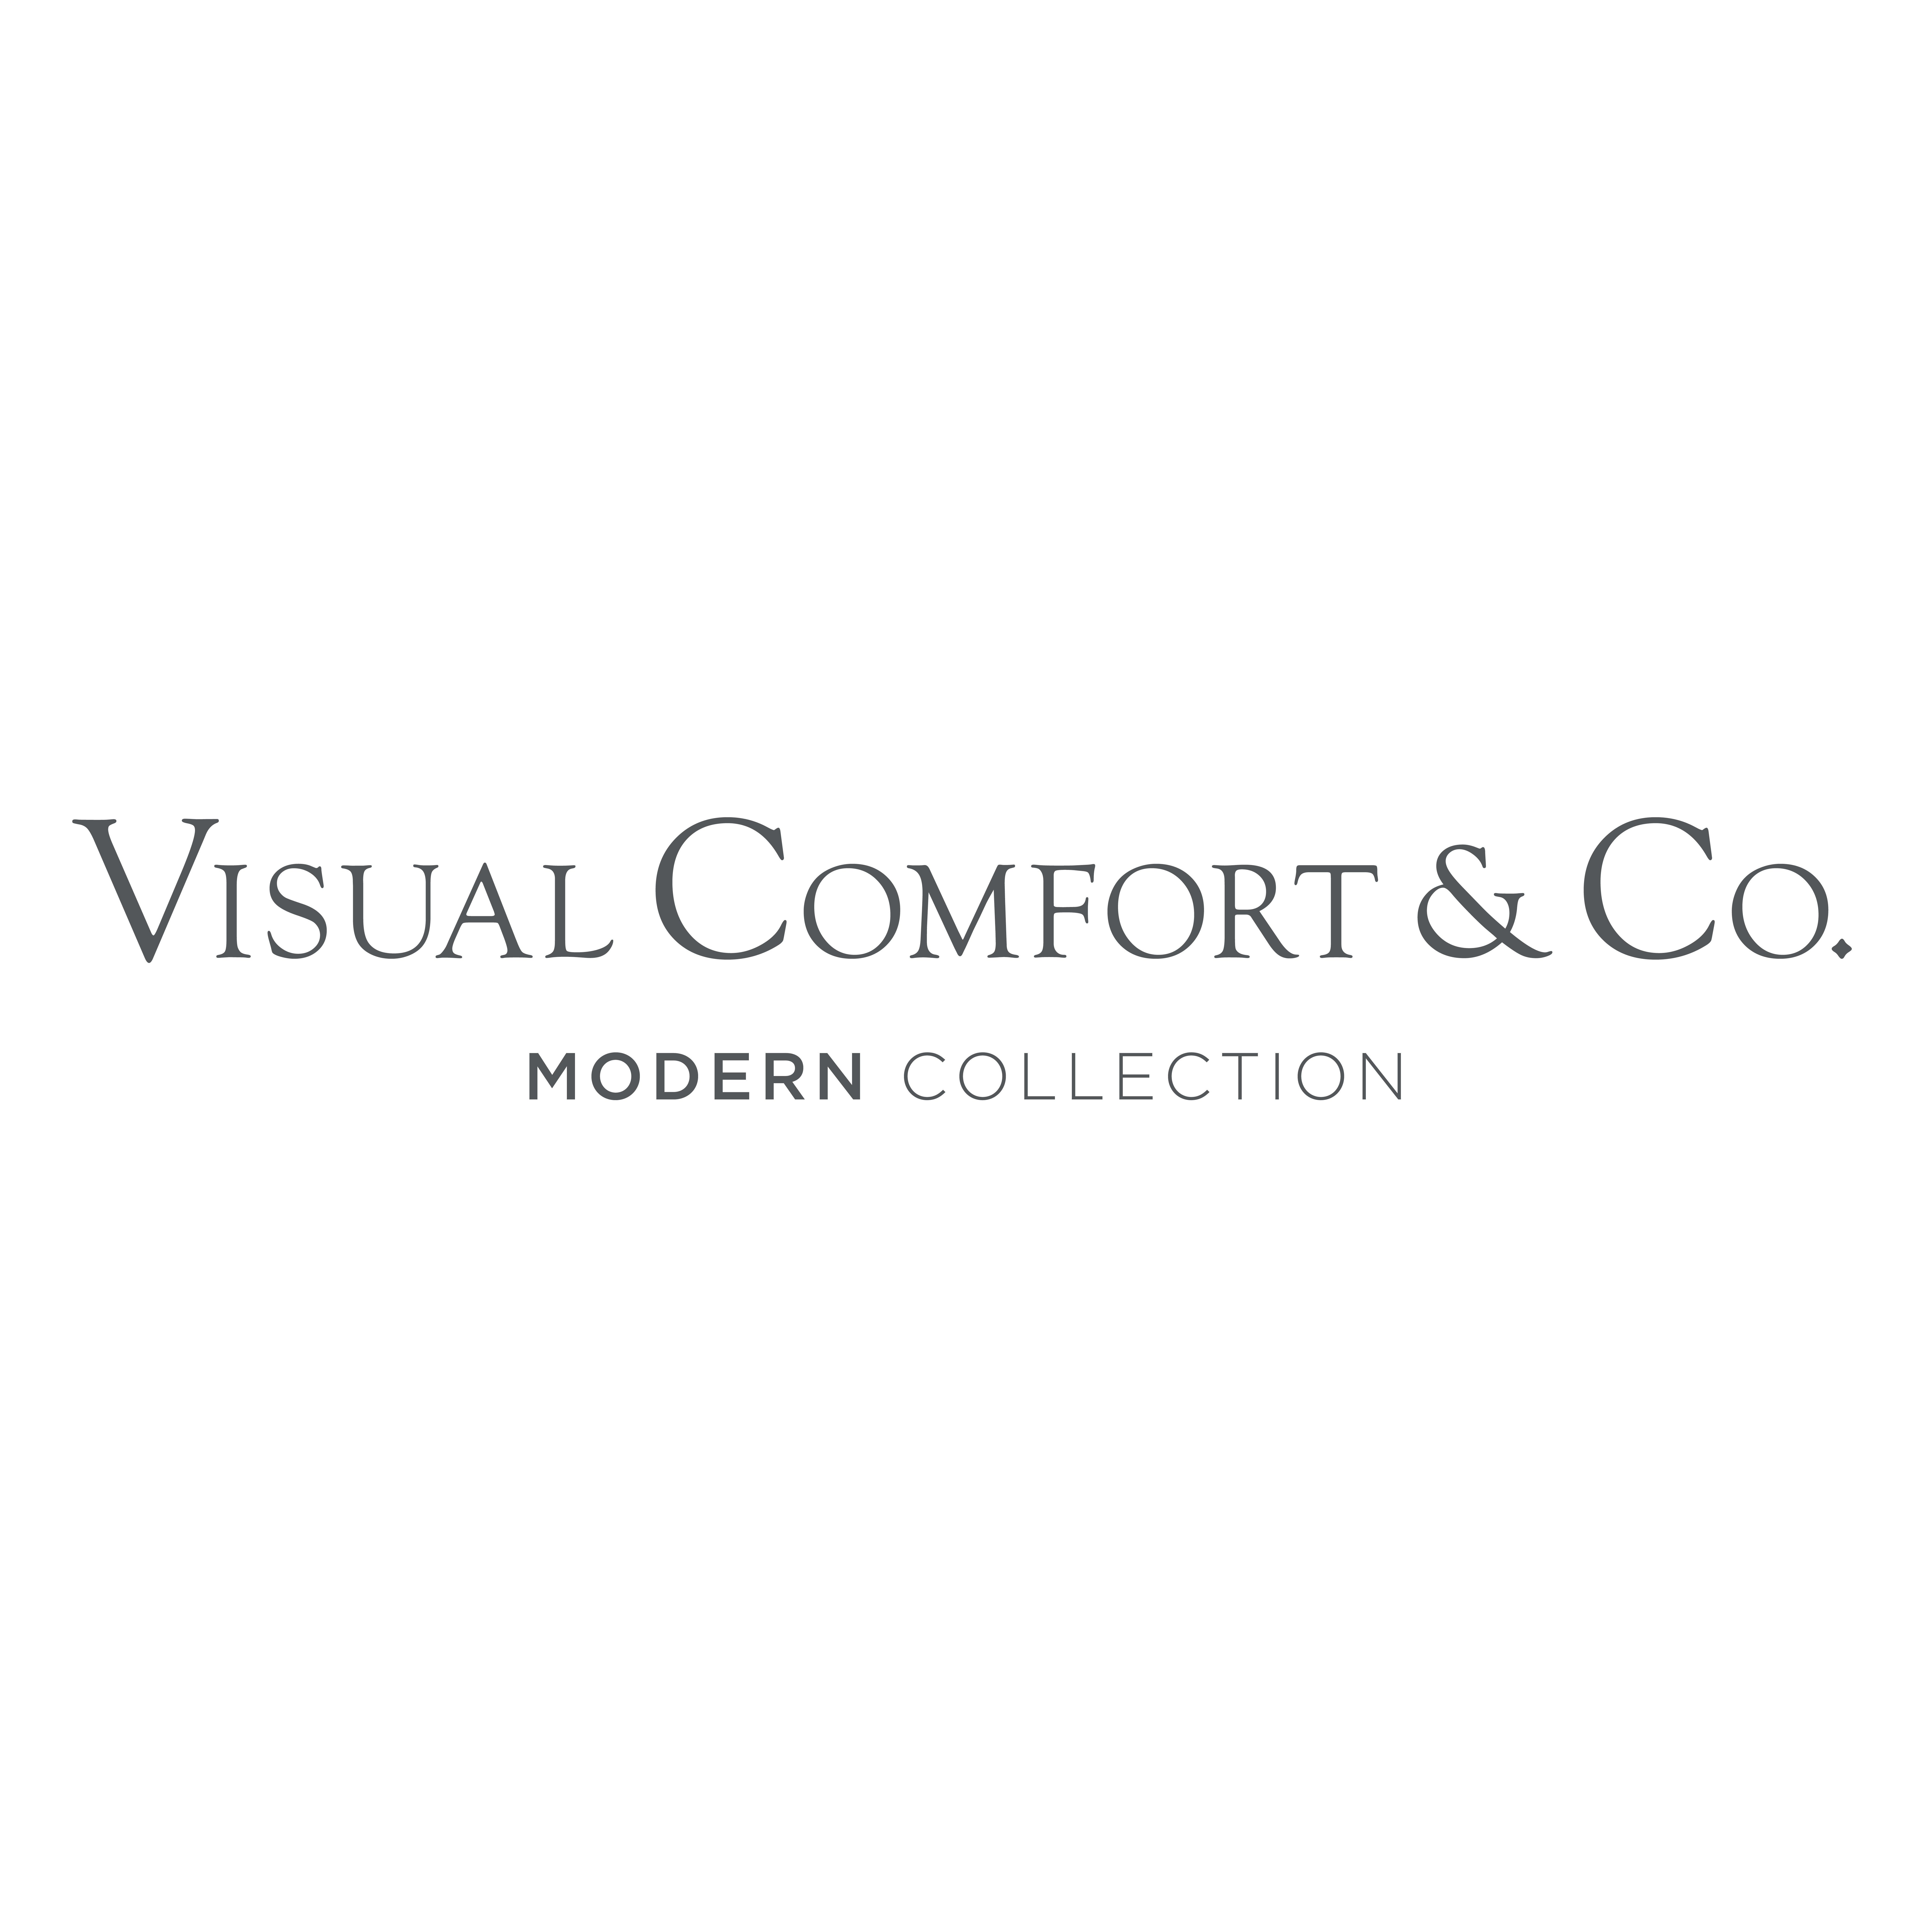 VISUAL COMFORT & CO. MODERN COLLECTION in 